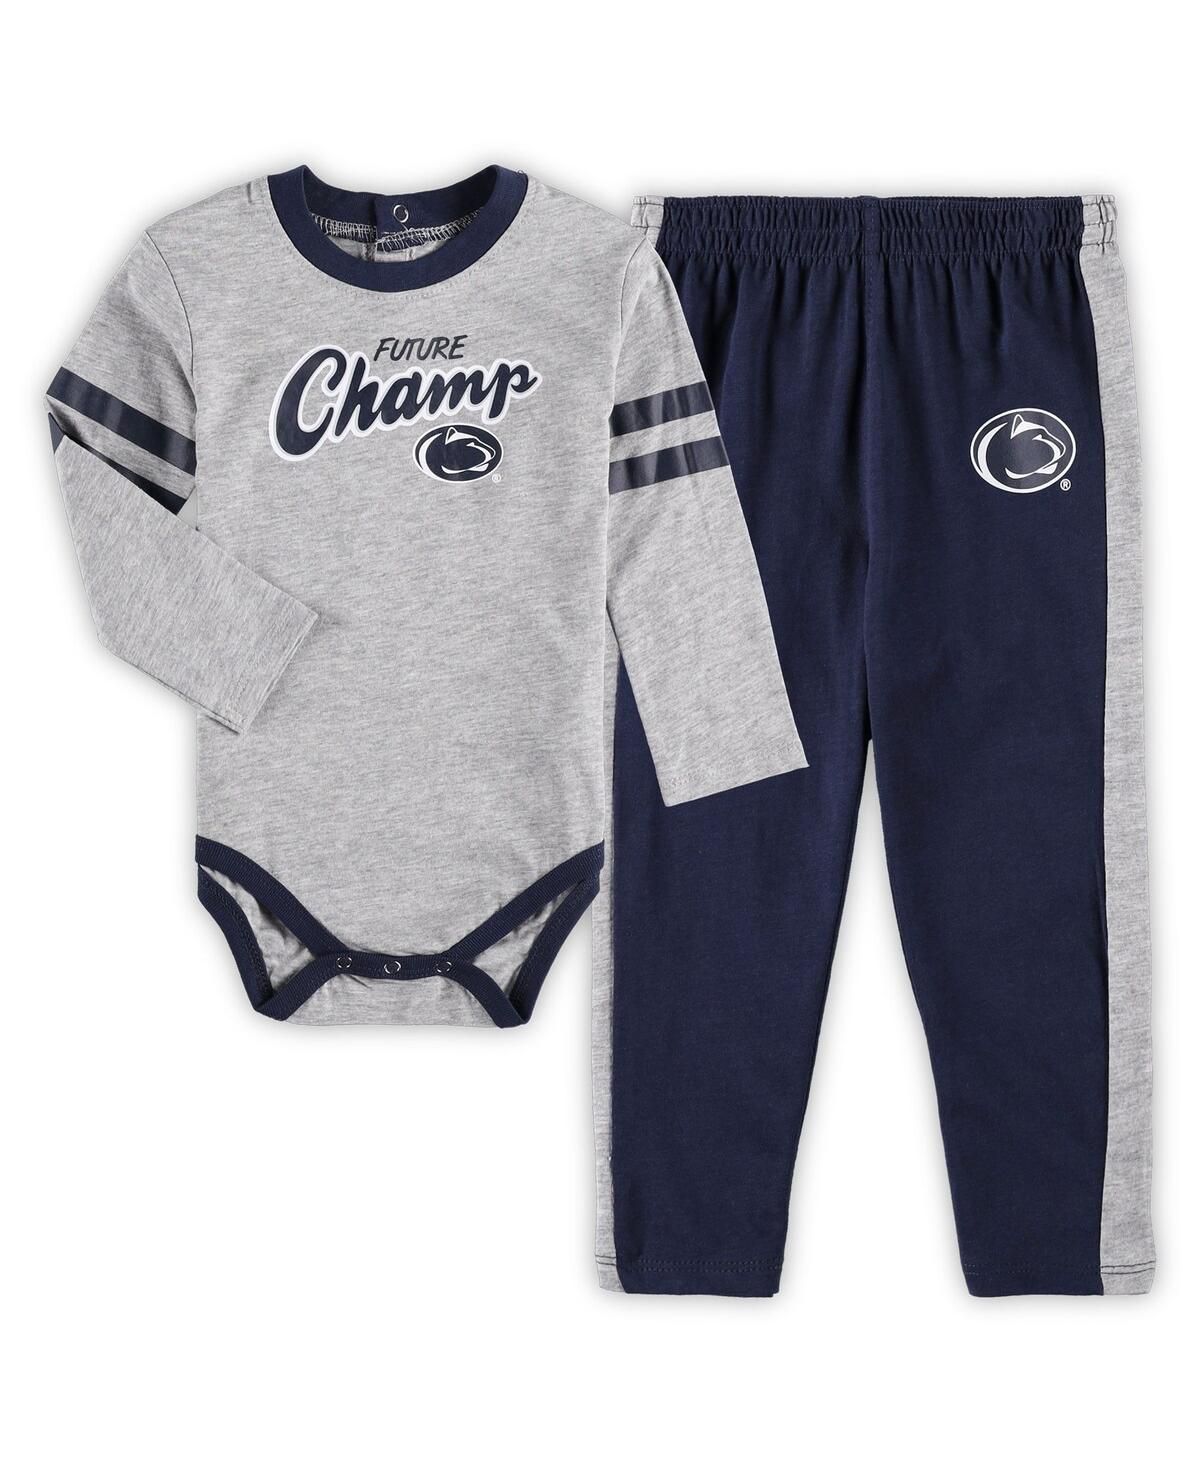 OUTERSTUFF INFANT BOYS AND GIRLS HEATHERED GRAY, NAVY PENN STATE NITTANY LIONS LITTLE KICKER LONG SLEEVE BODYSU